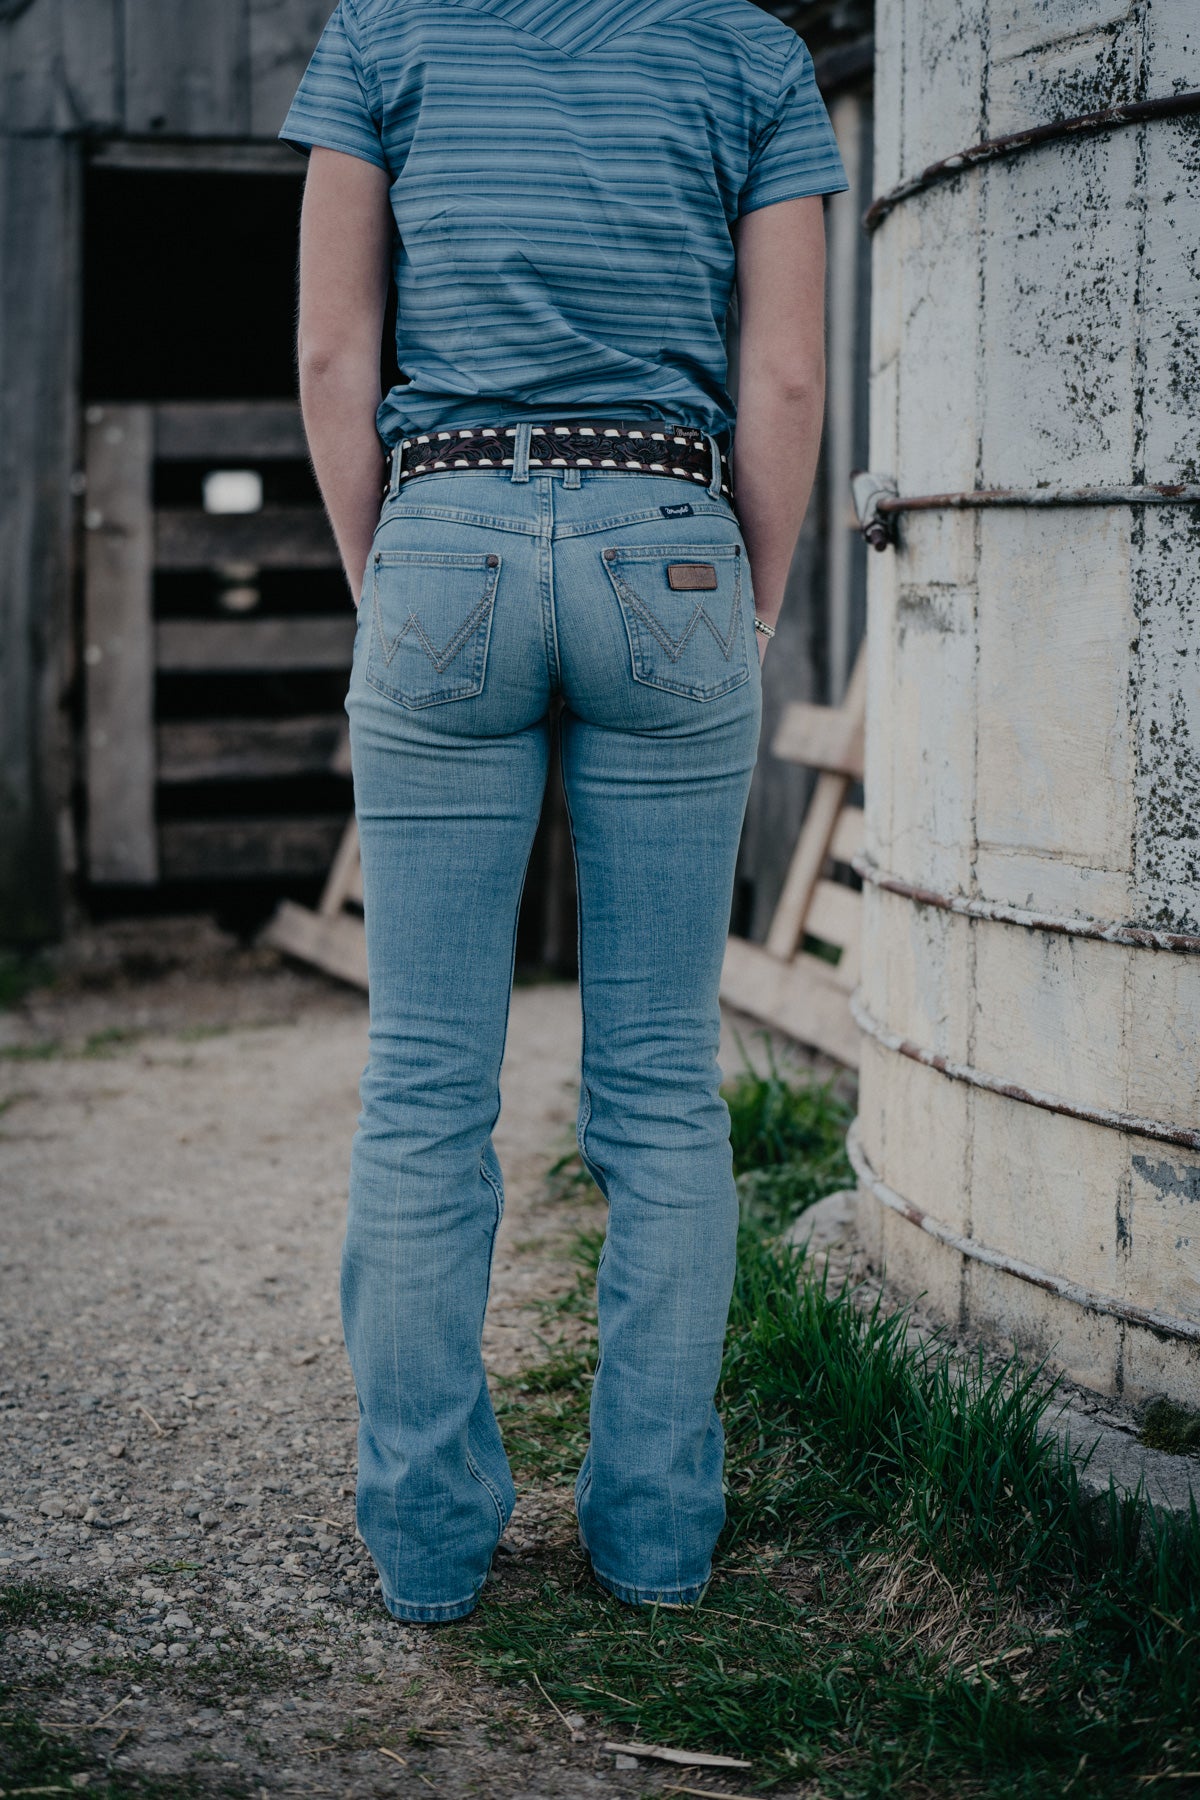 Mid-Rise Bootcut Jean